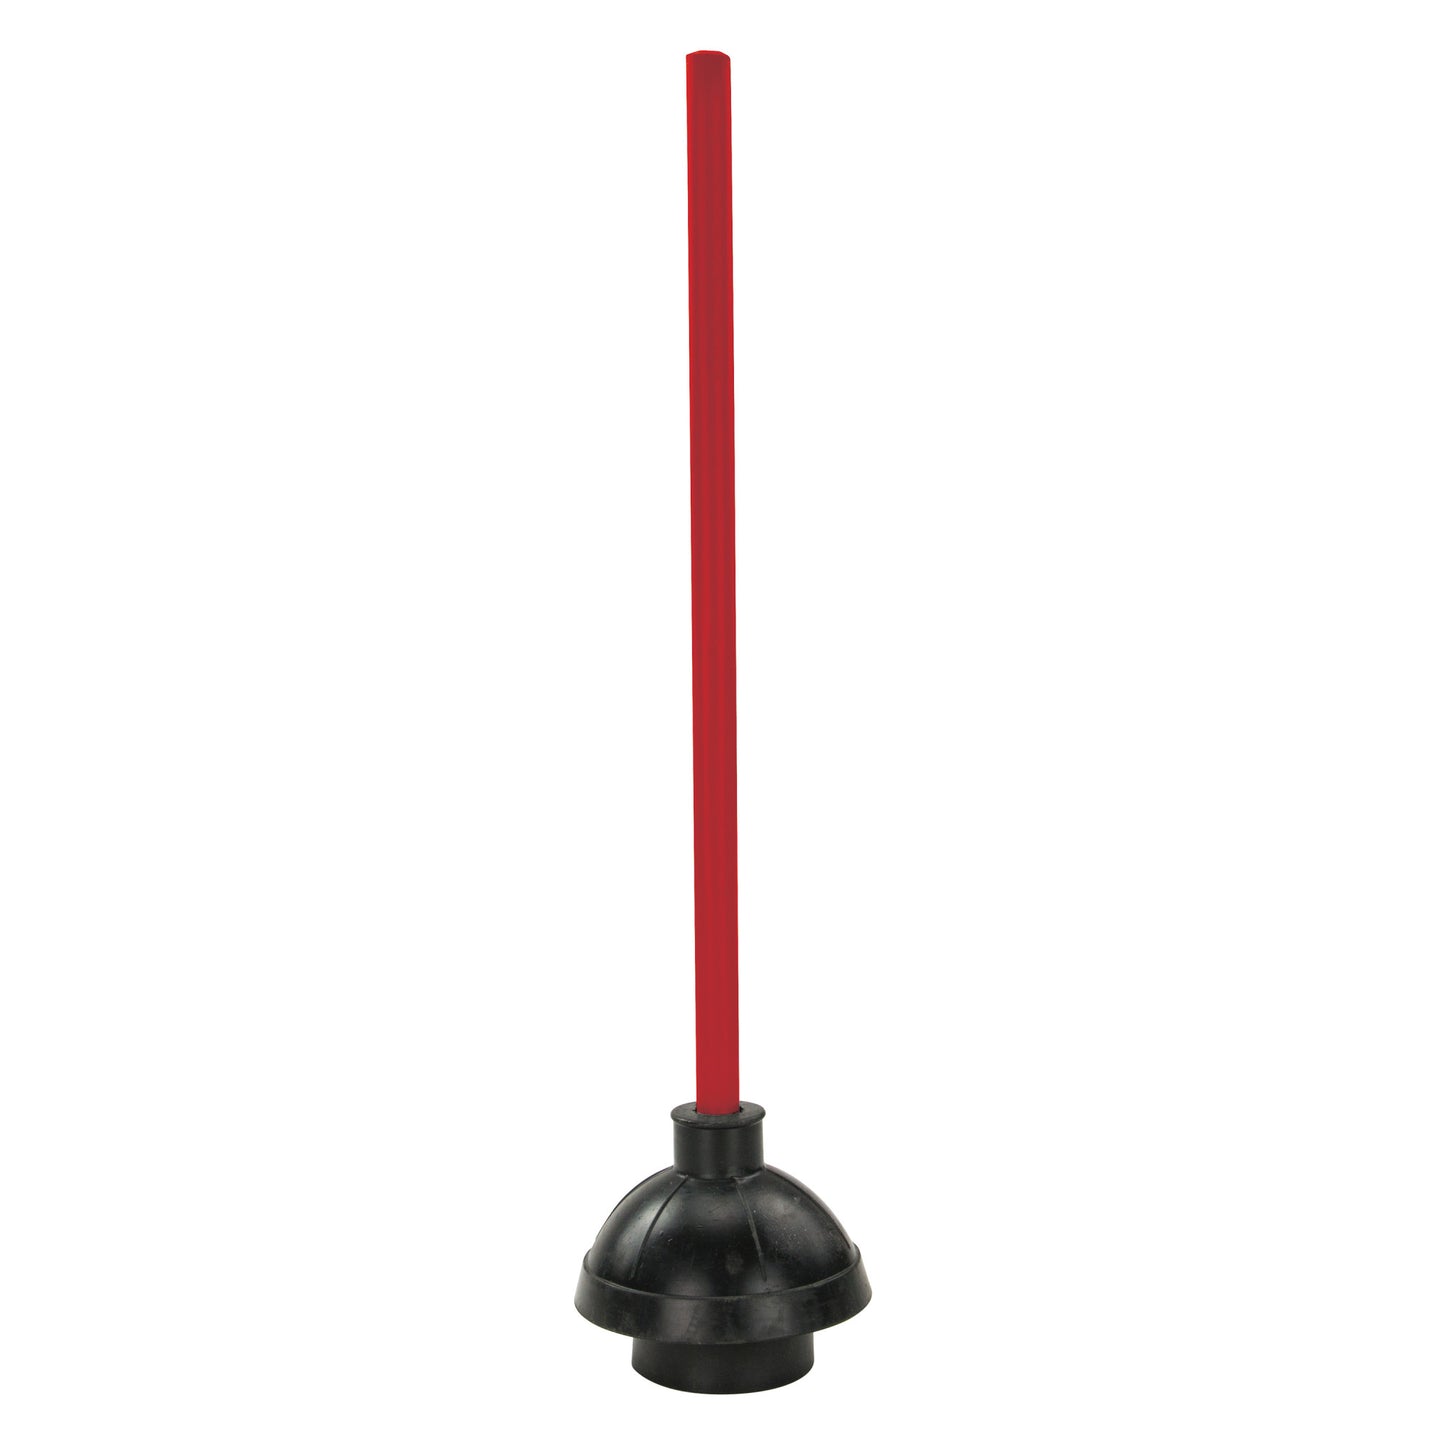 TP-300 - 19" Toilet Plunger with Wooden Handle